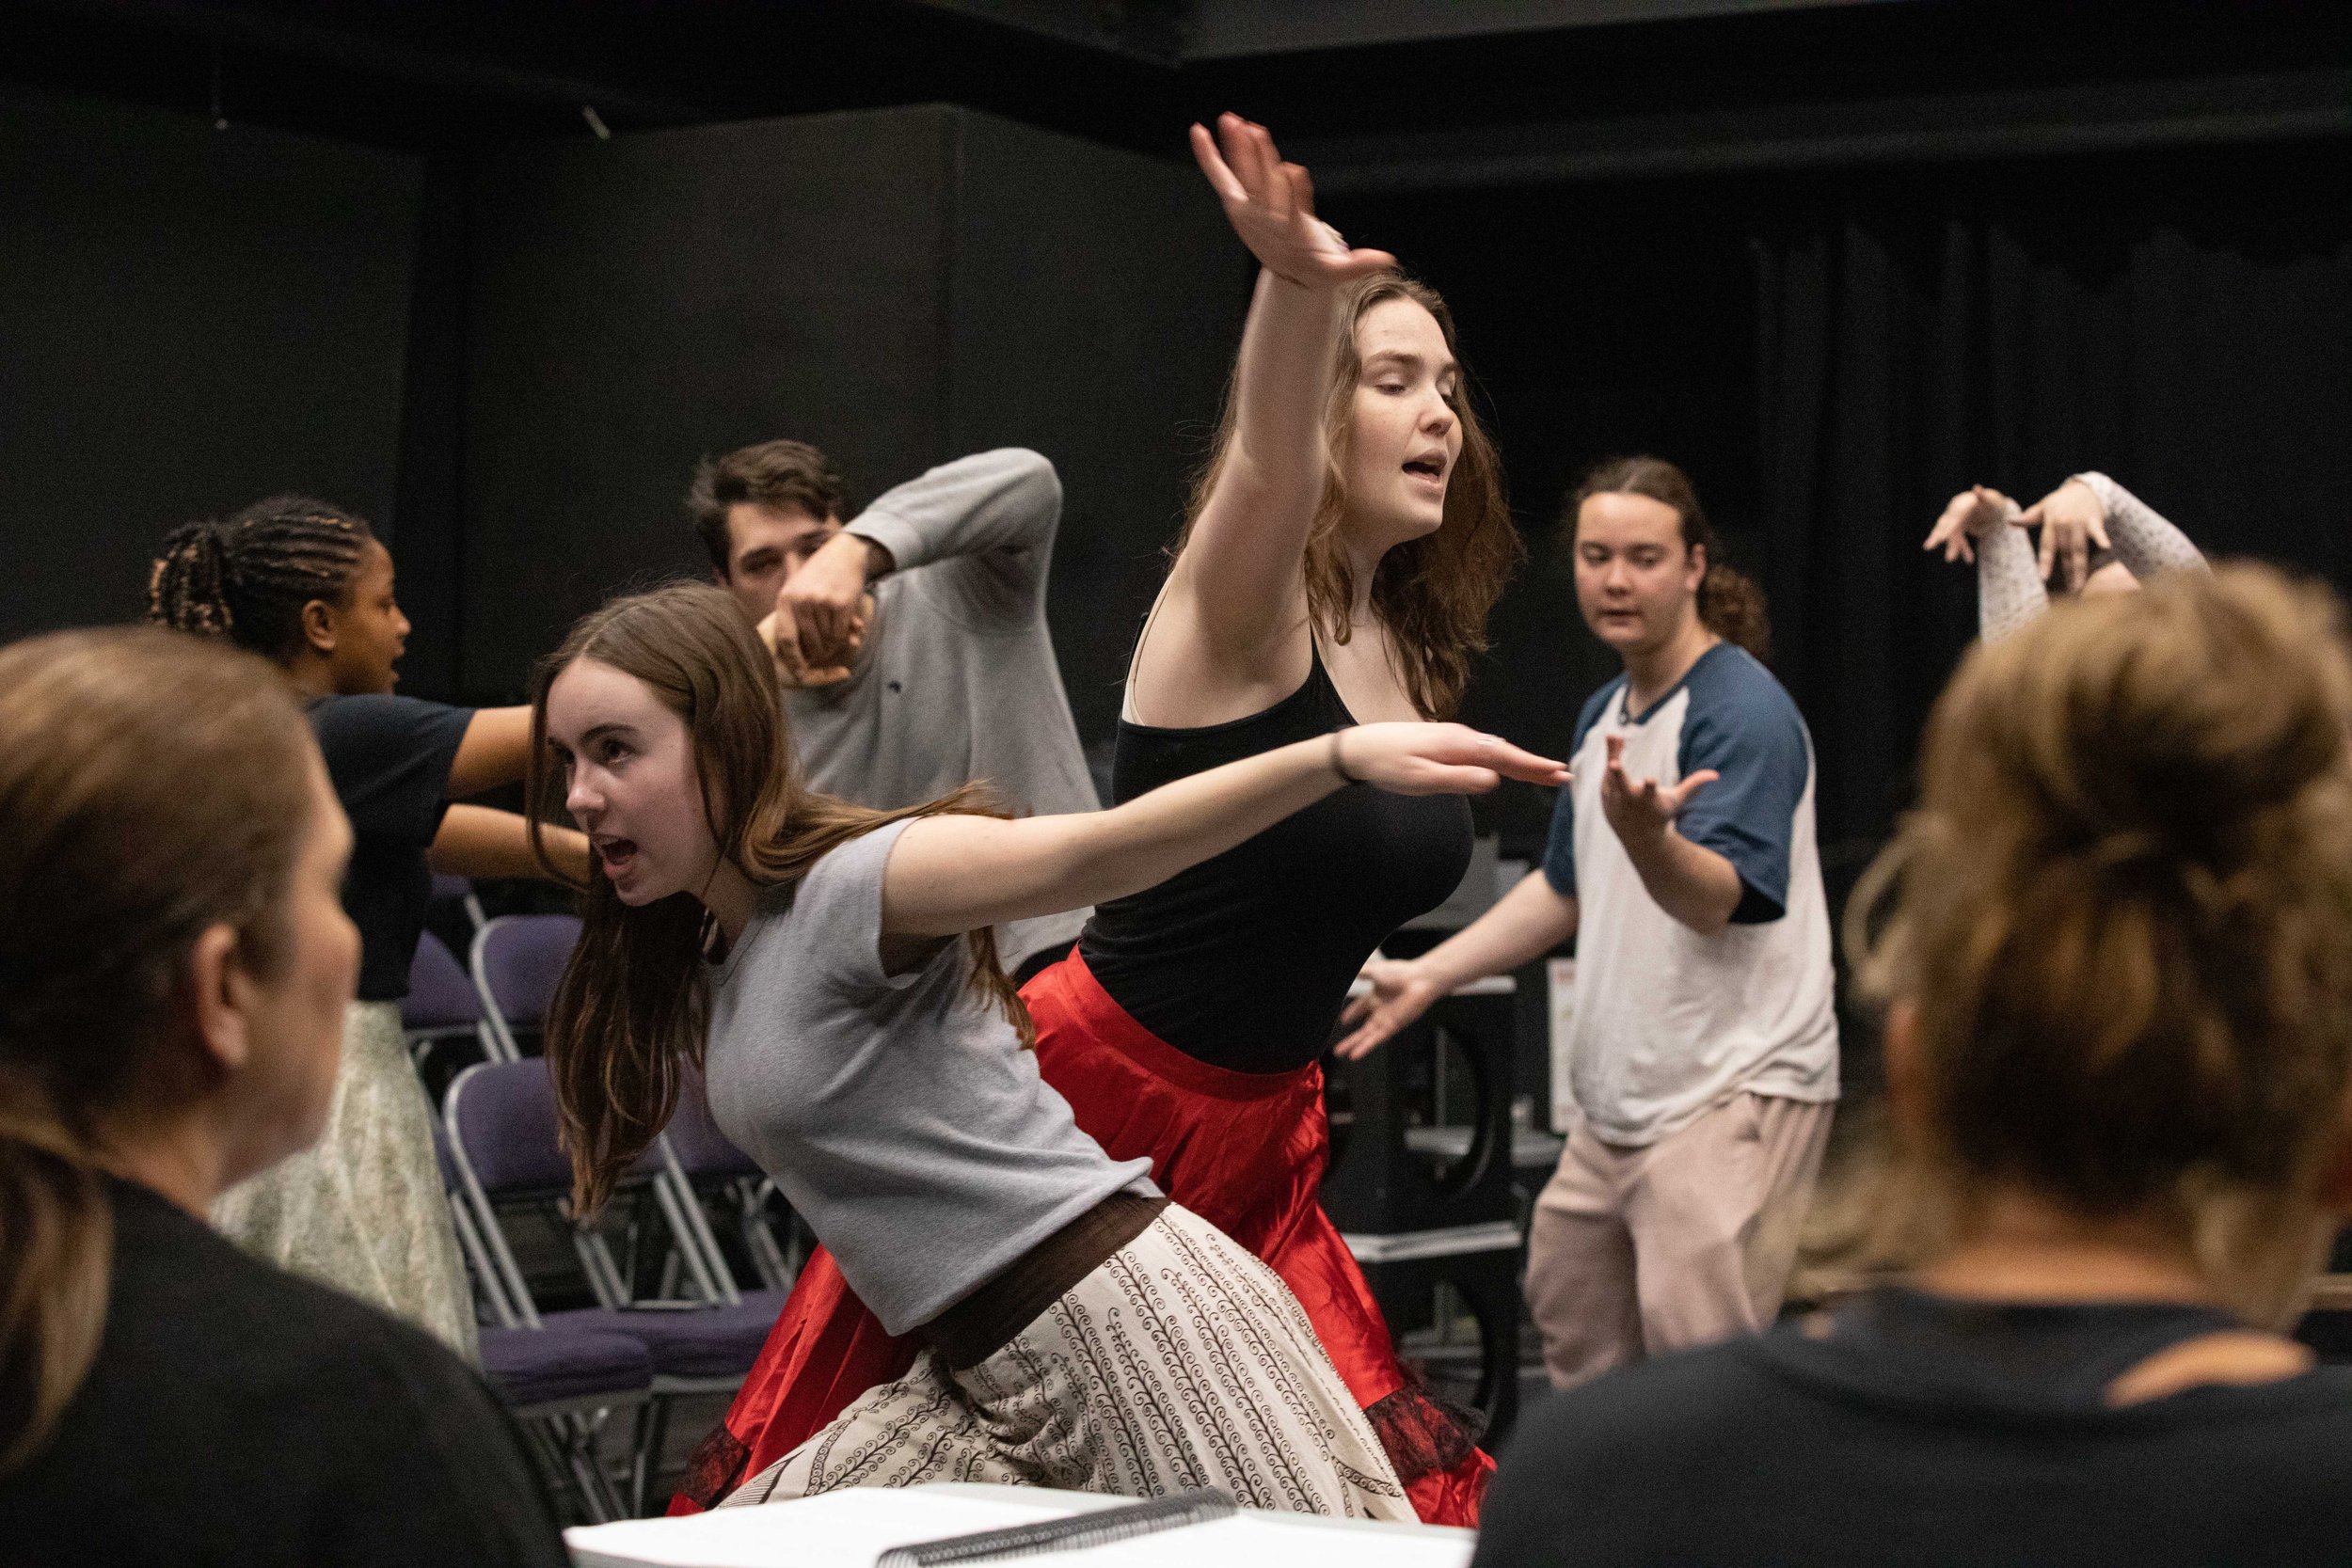  SMC theater students performing at a class rehearsal for the musical “Hunchback of Notredame”. In the foreground, Instructor Perviz Sawoski (Left) and Roma/Gitano Choreographer Cihtli Ocampo  (right). Theater Arts building at SMC main campus, Santa 